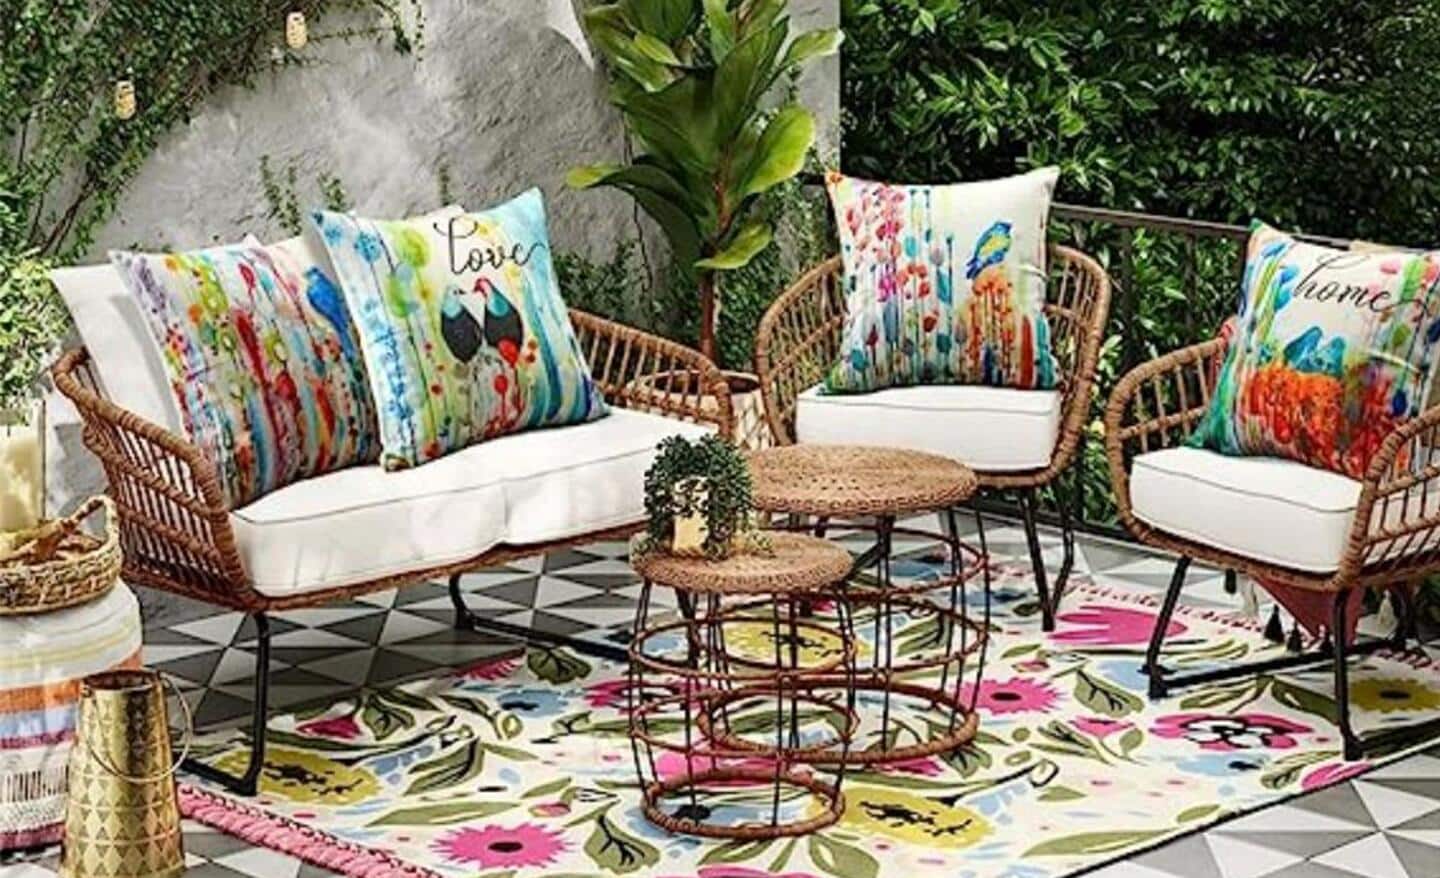 Colorful decorative pillows and other patio accessories on a decorative rug.